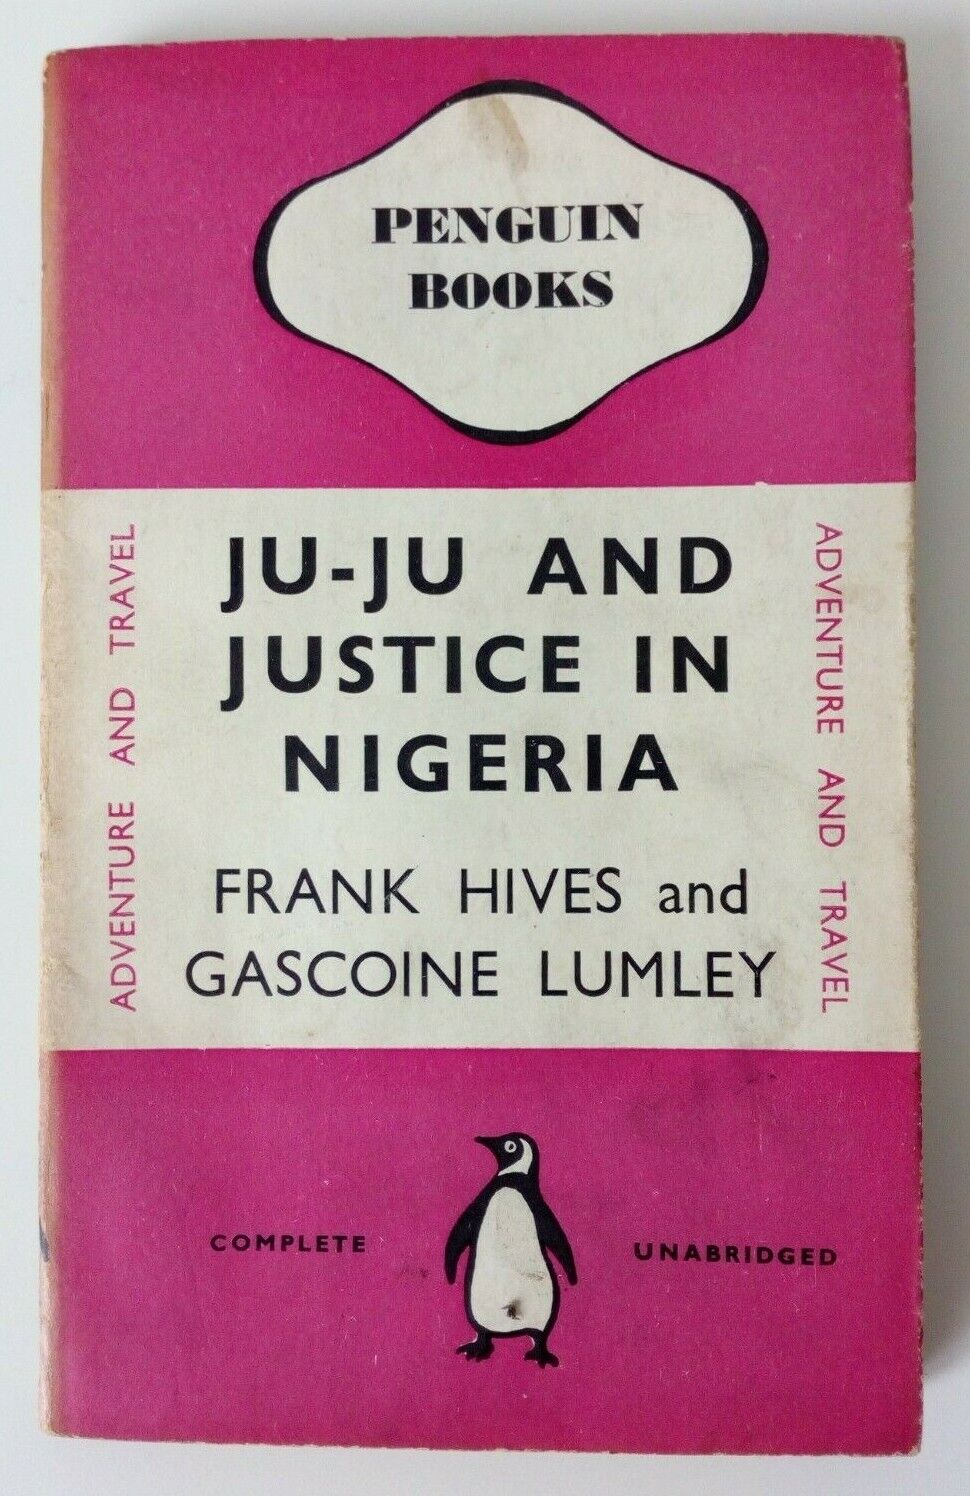 1940 JU-JU AND JUSTICE IN NIGERIA 1ST/1ST by HIVES & LUMLEY PENGUIN BOOK 298 VGC